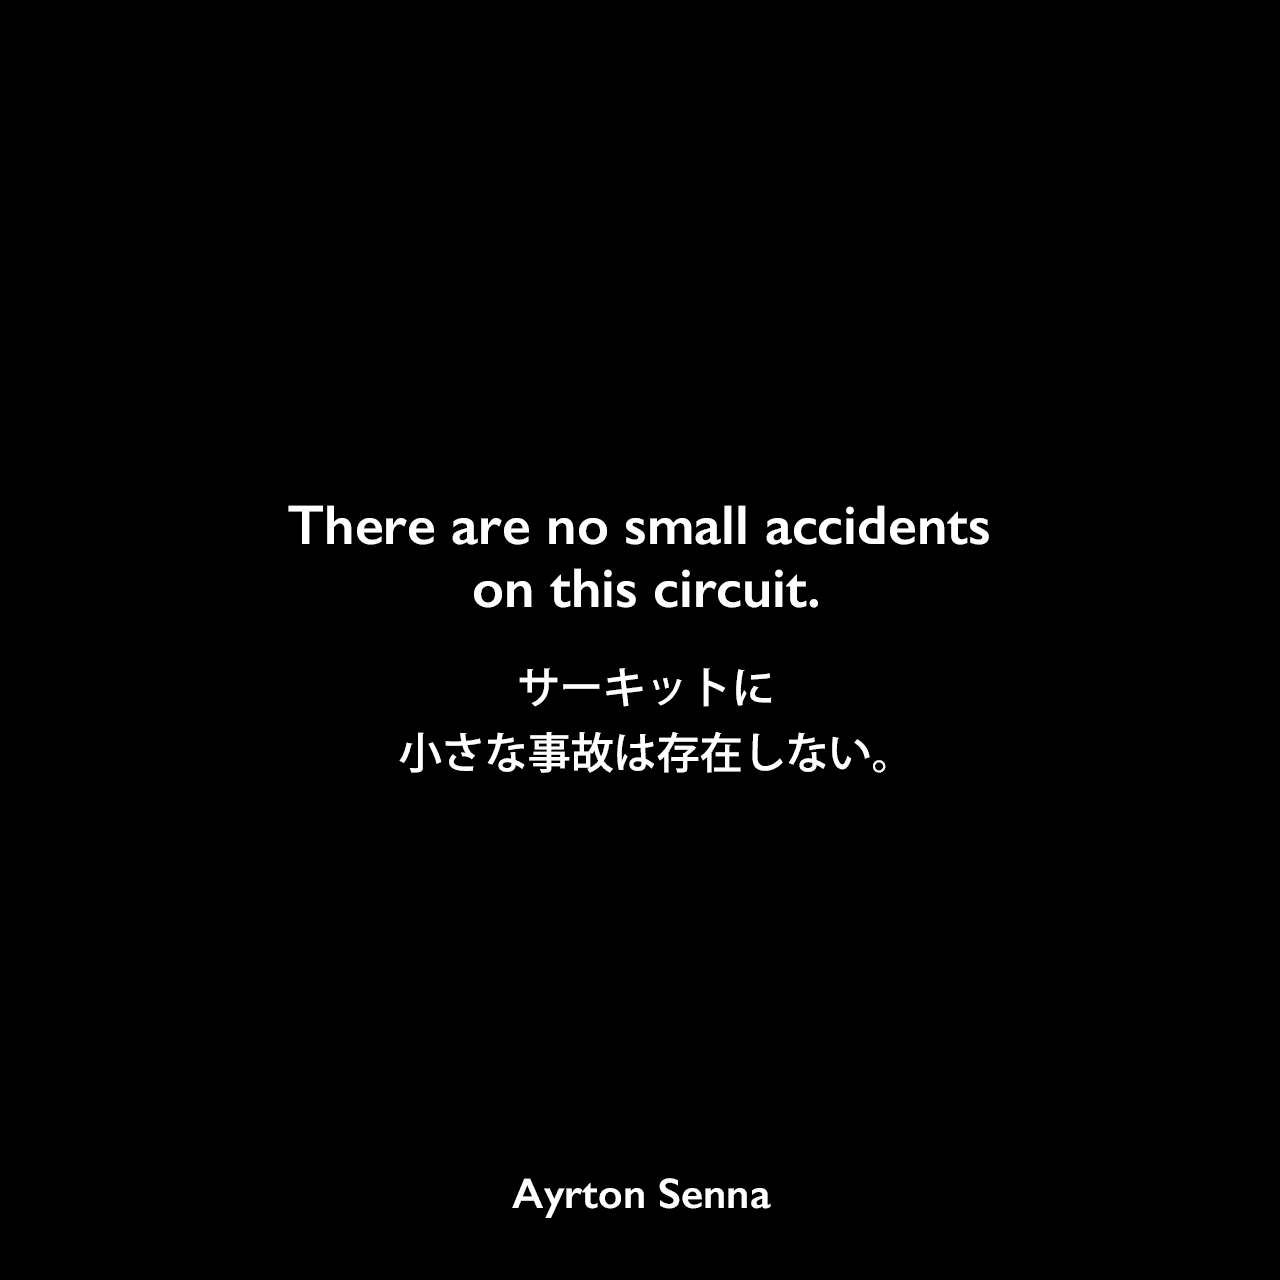 There are no small accidents on this circuit.サーキットに小さな事故は存在しない。Ayrton Senna